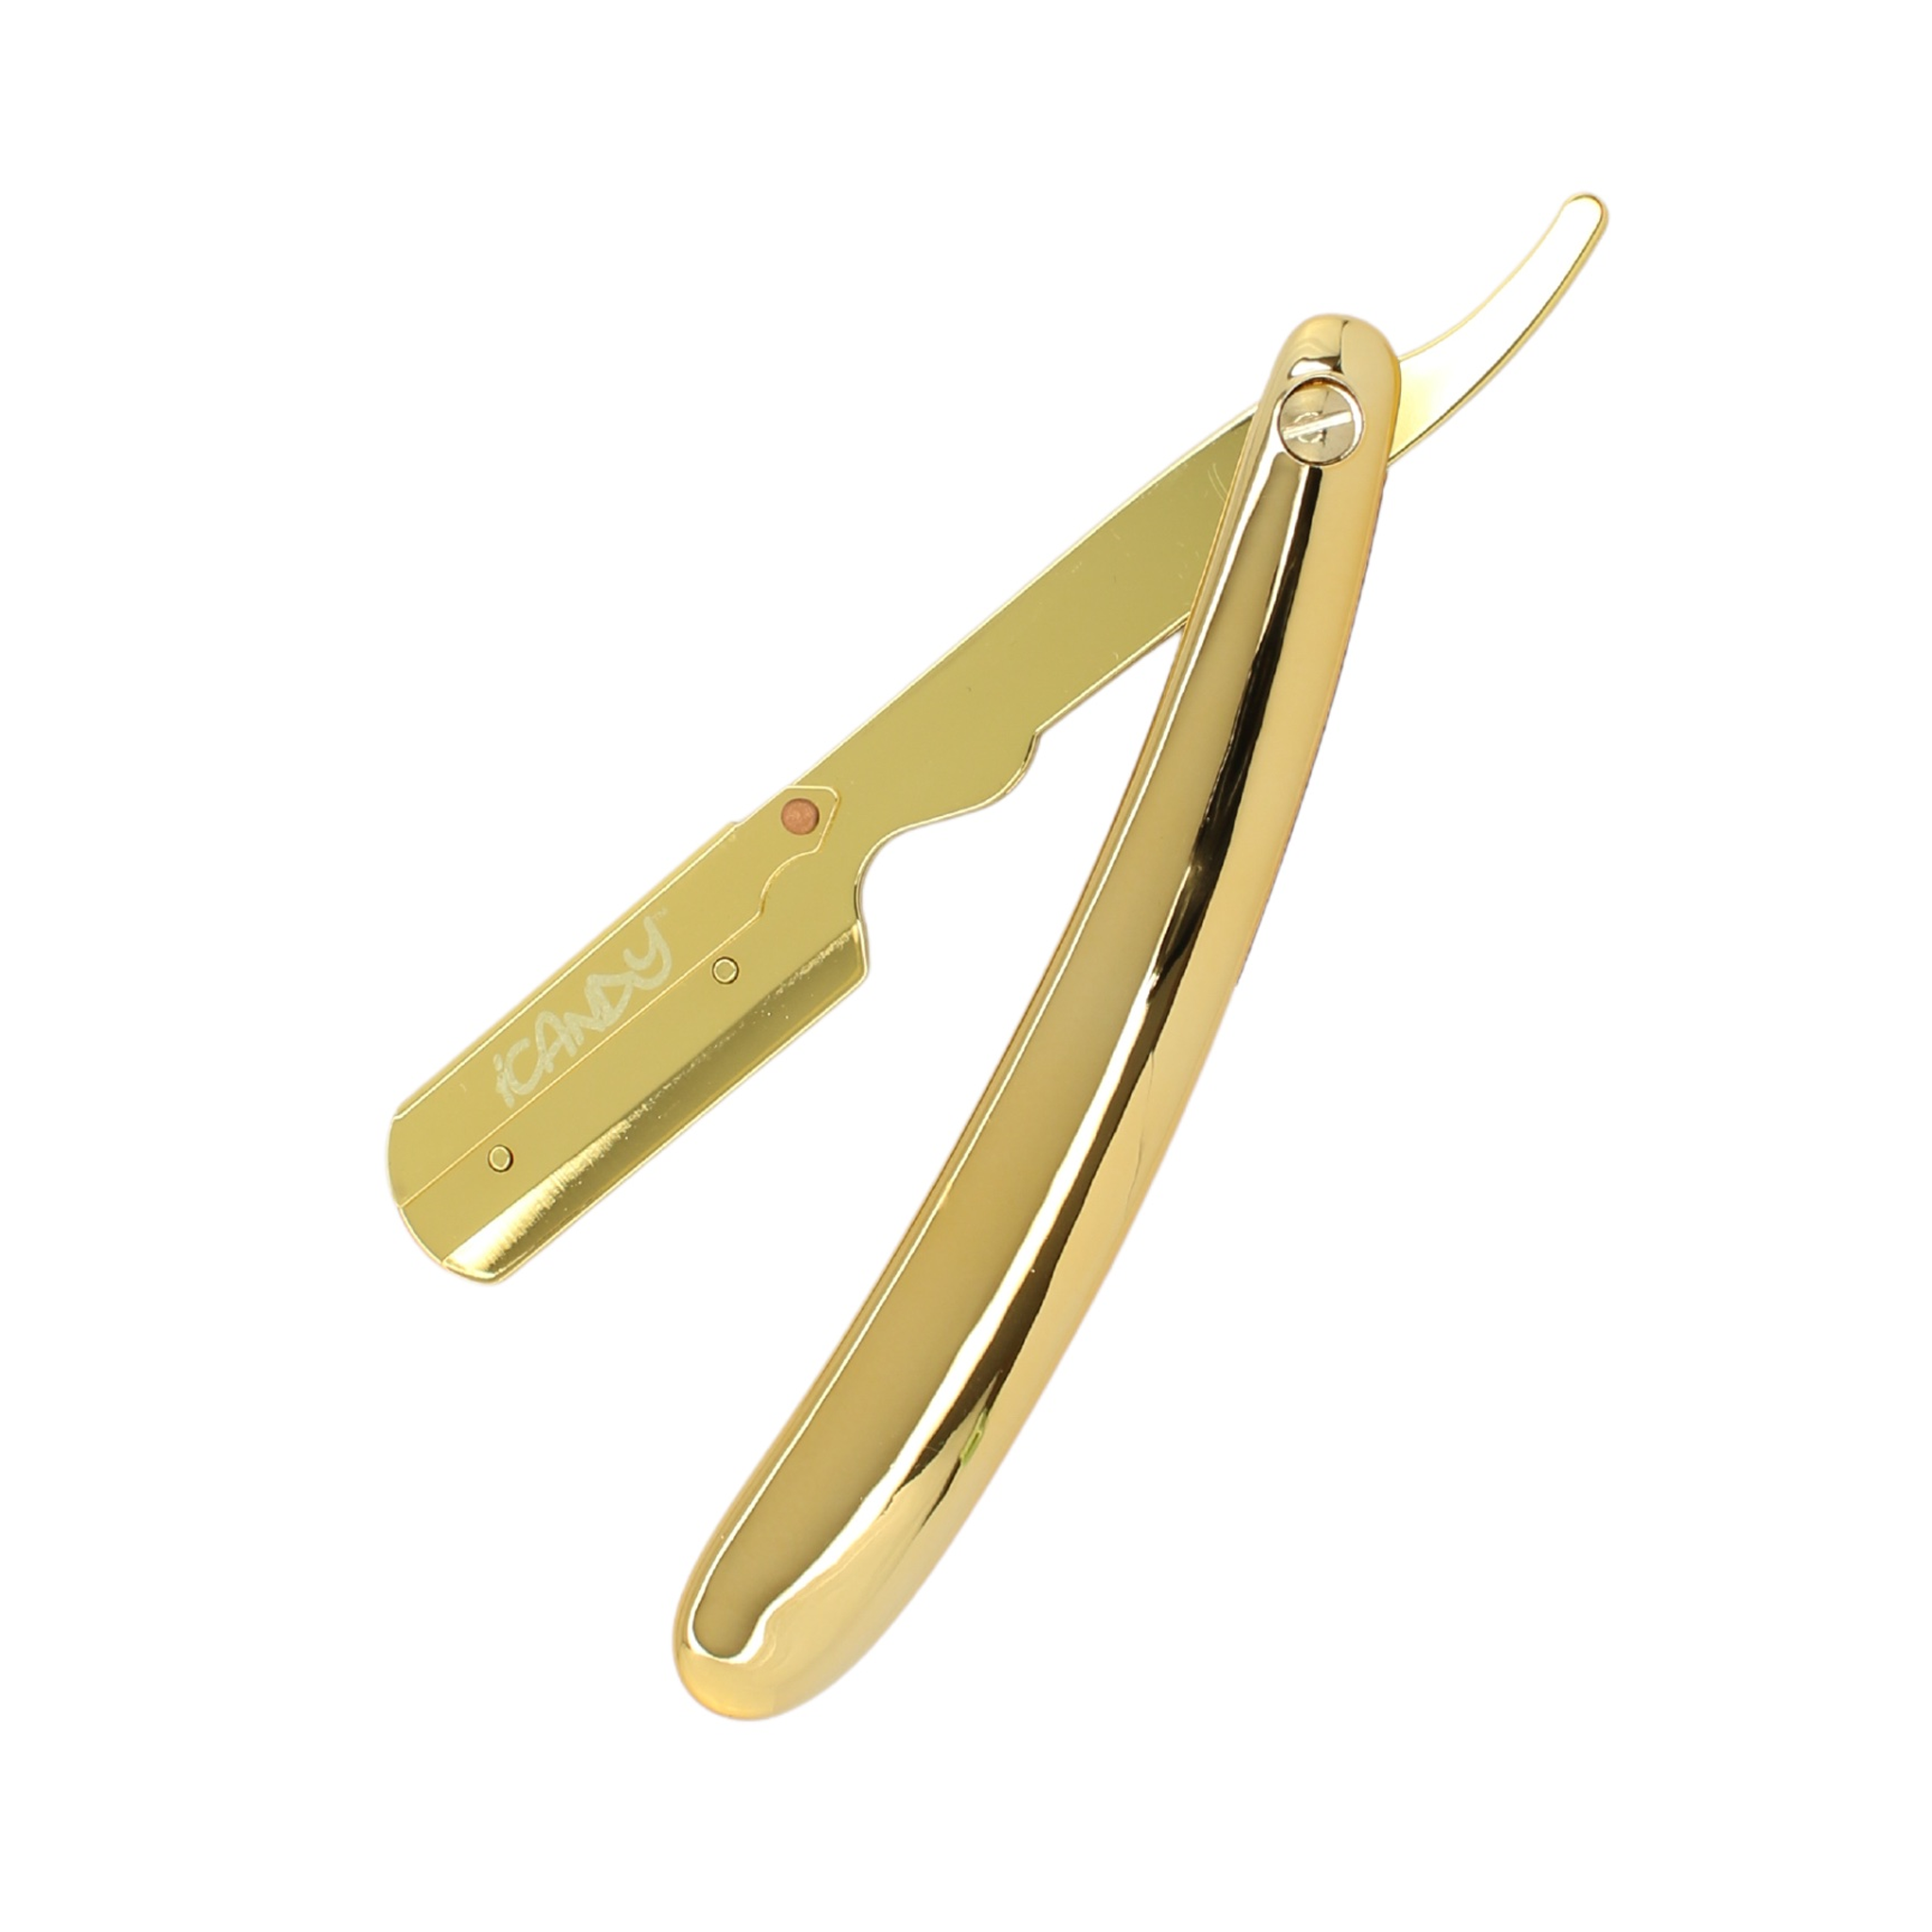 iCandy Butterfly Razor - Gold